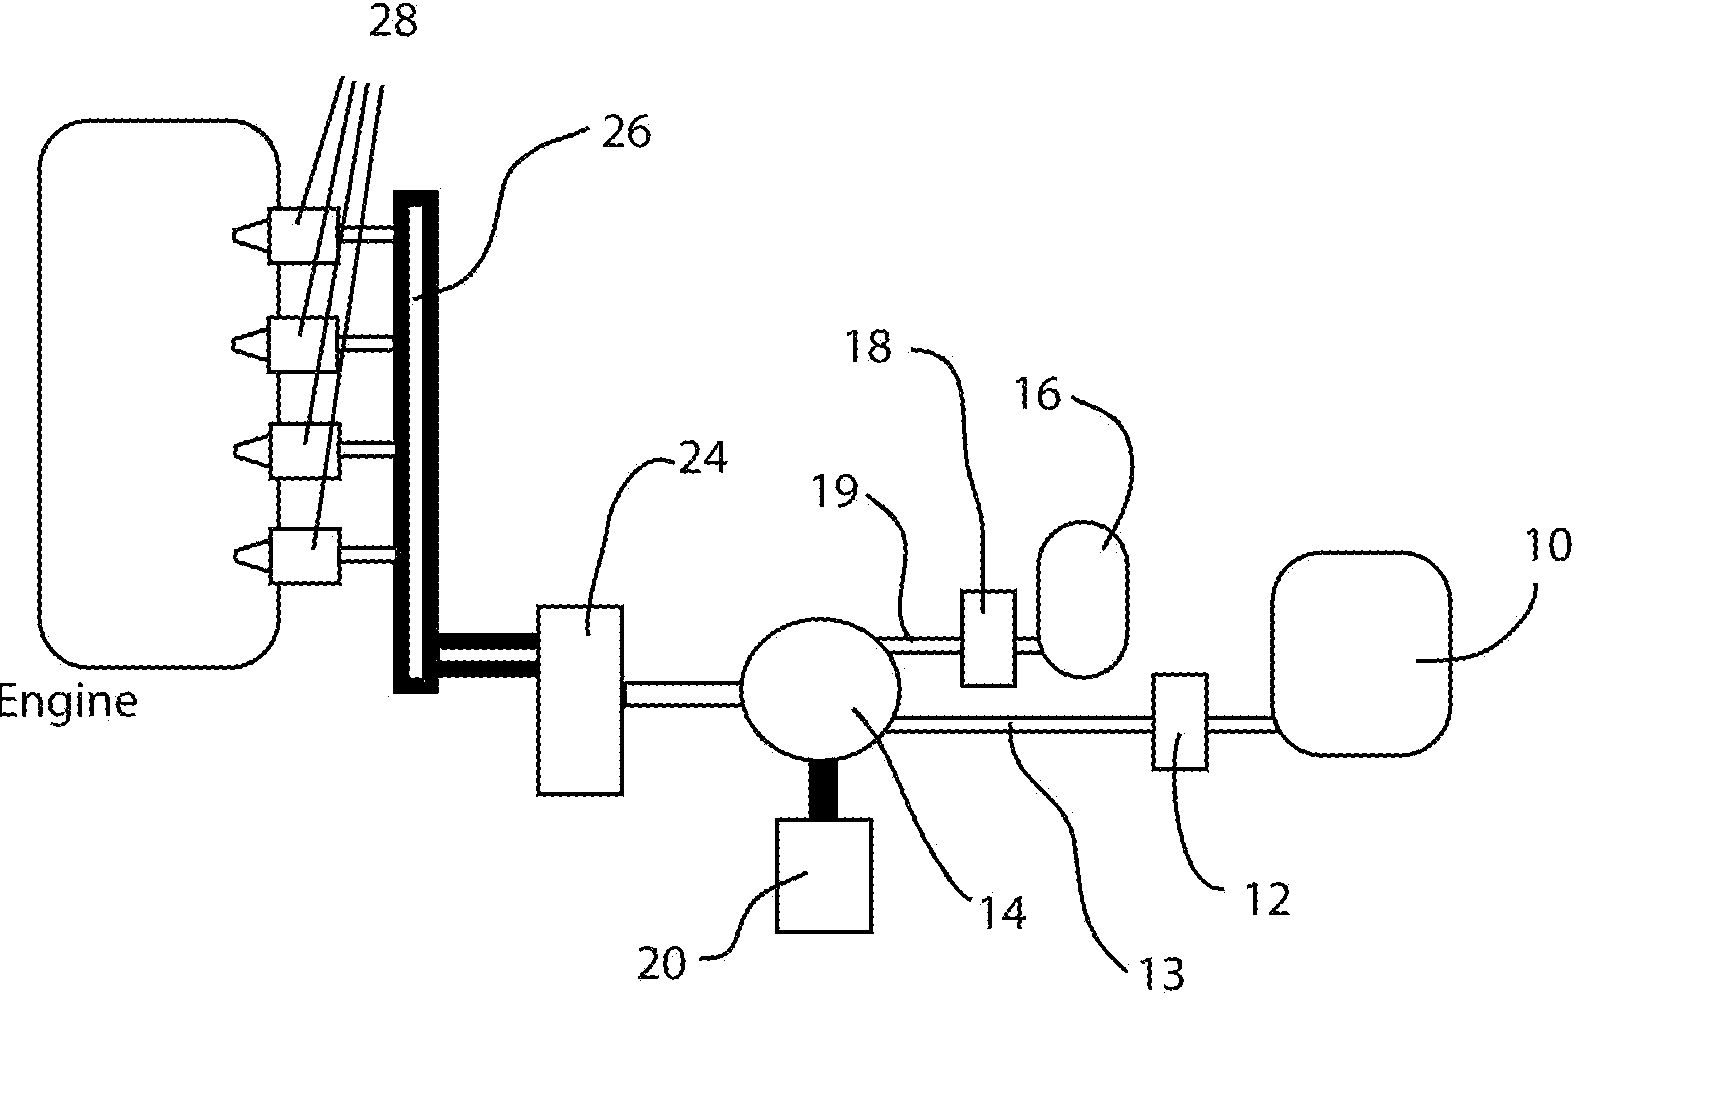 Single nozzle injection of gasoline and Anti-knock fuel